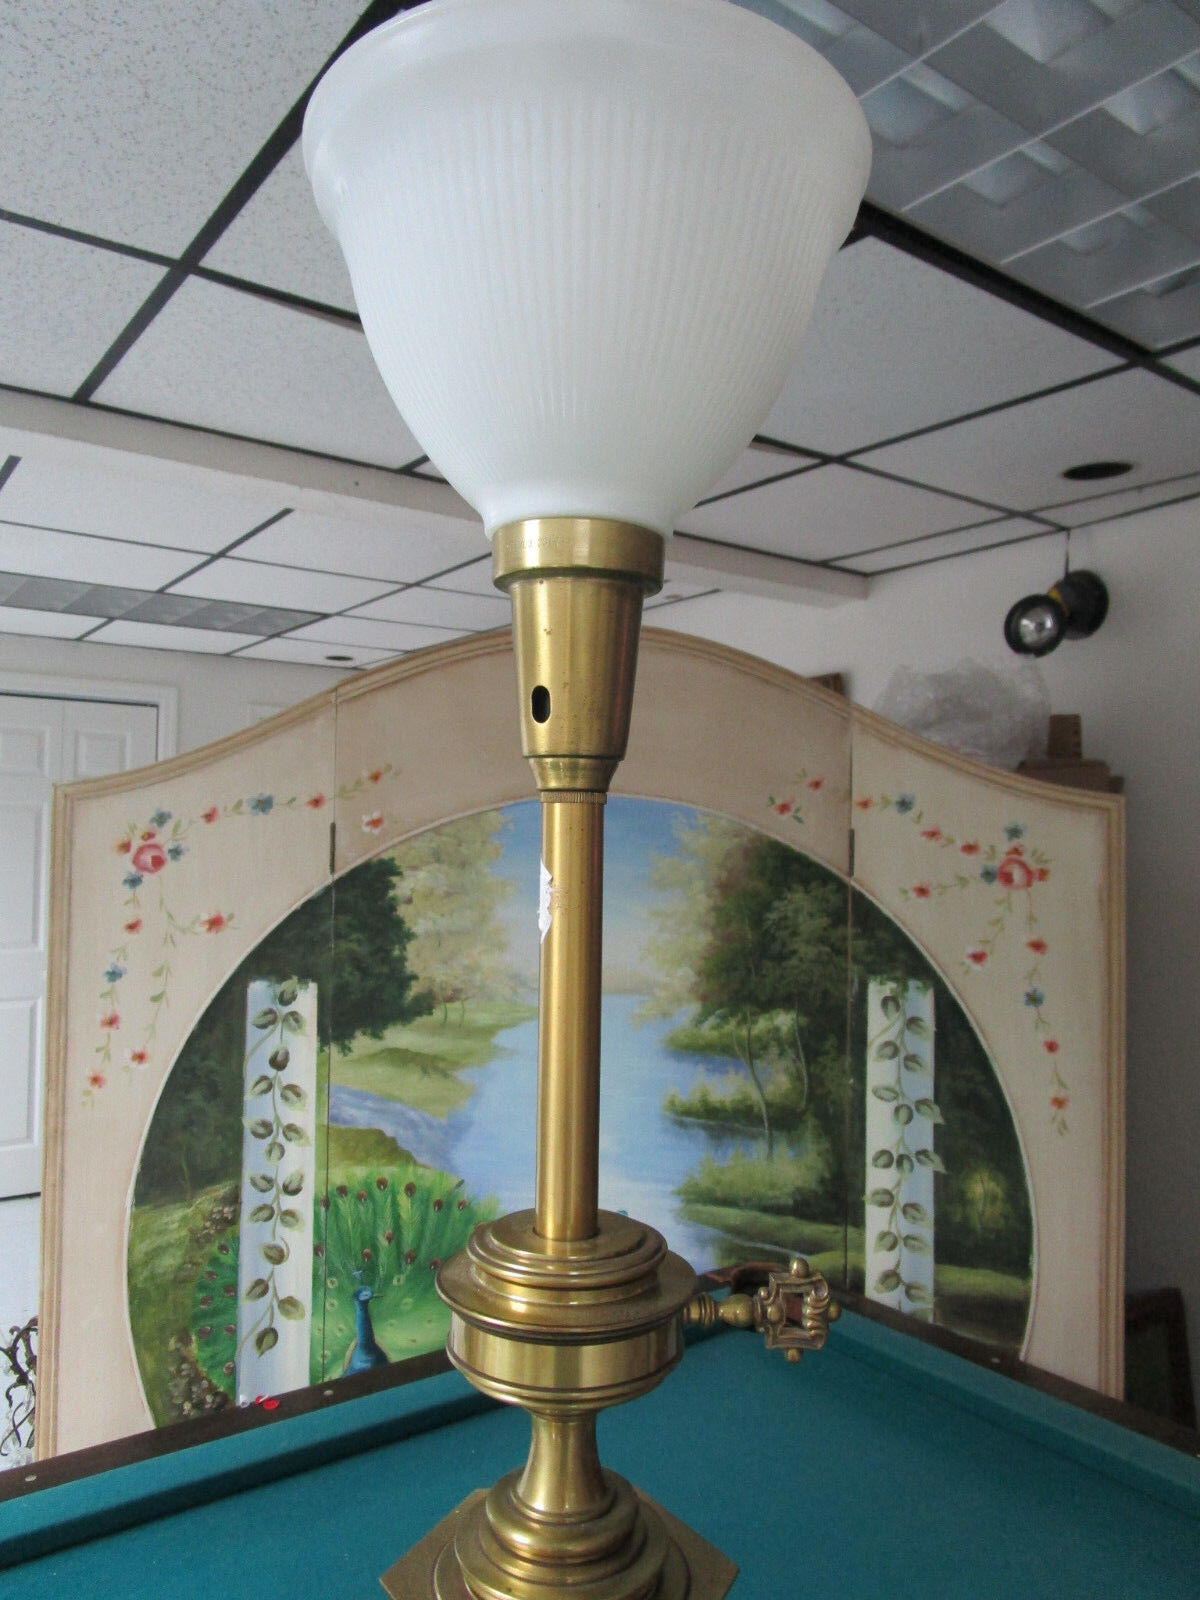 TORCHIERE TABLE LAMP BRASS AND CERAMIC LENOX STYLE  31" TALL TO BASE OF SHADE - $143.55